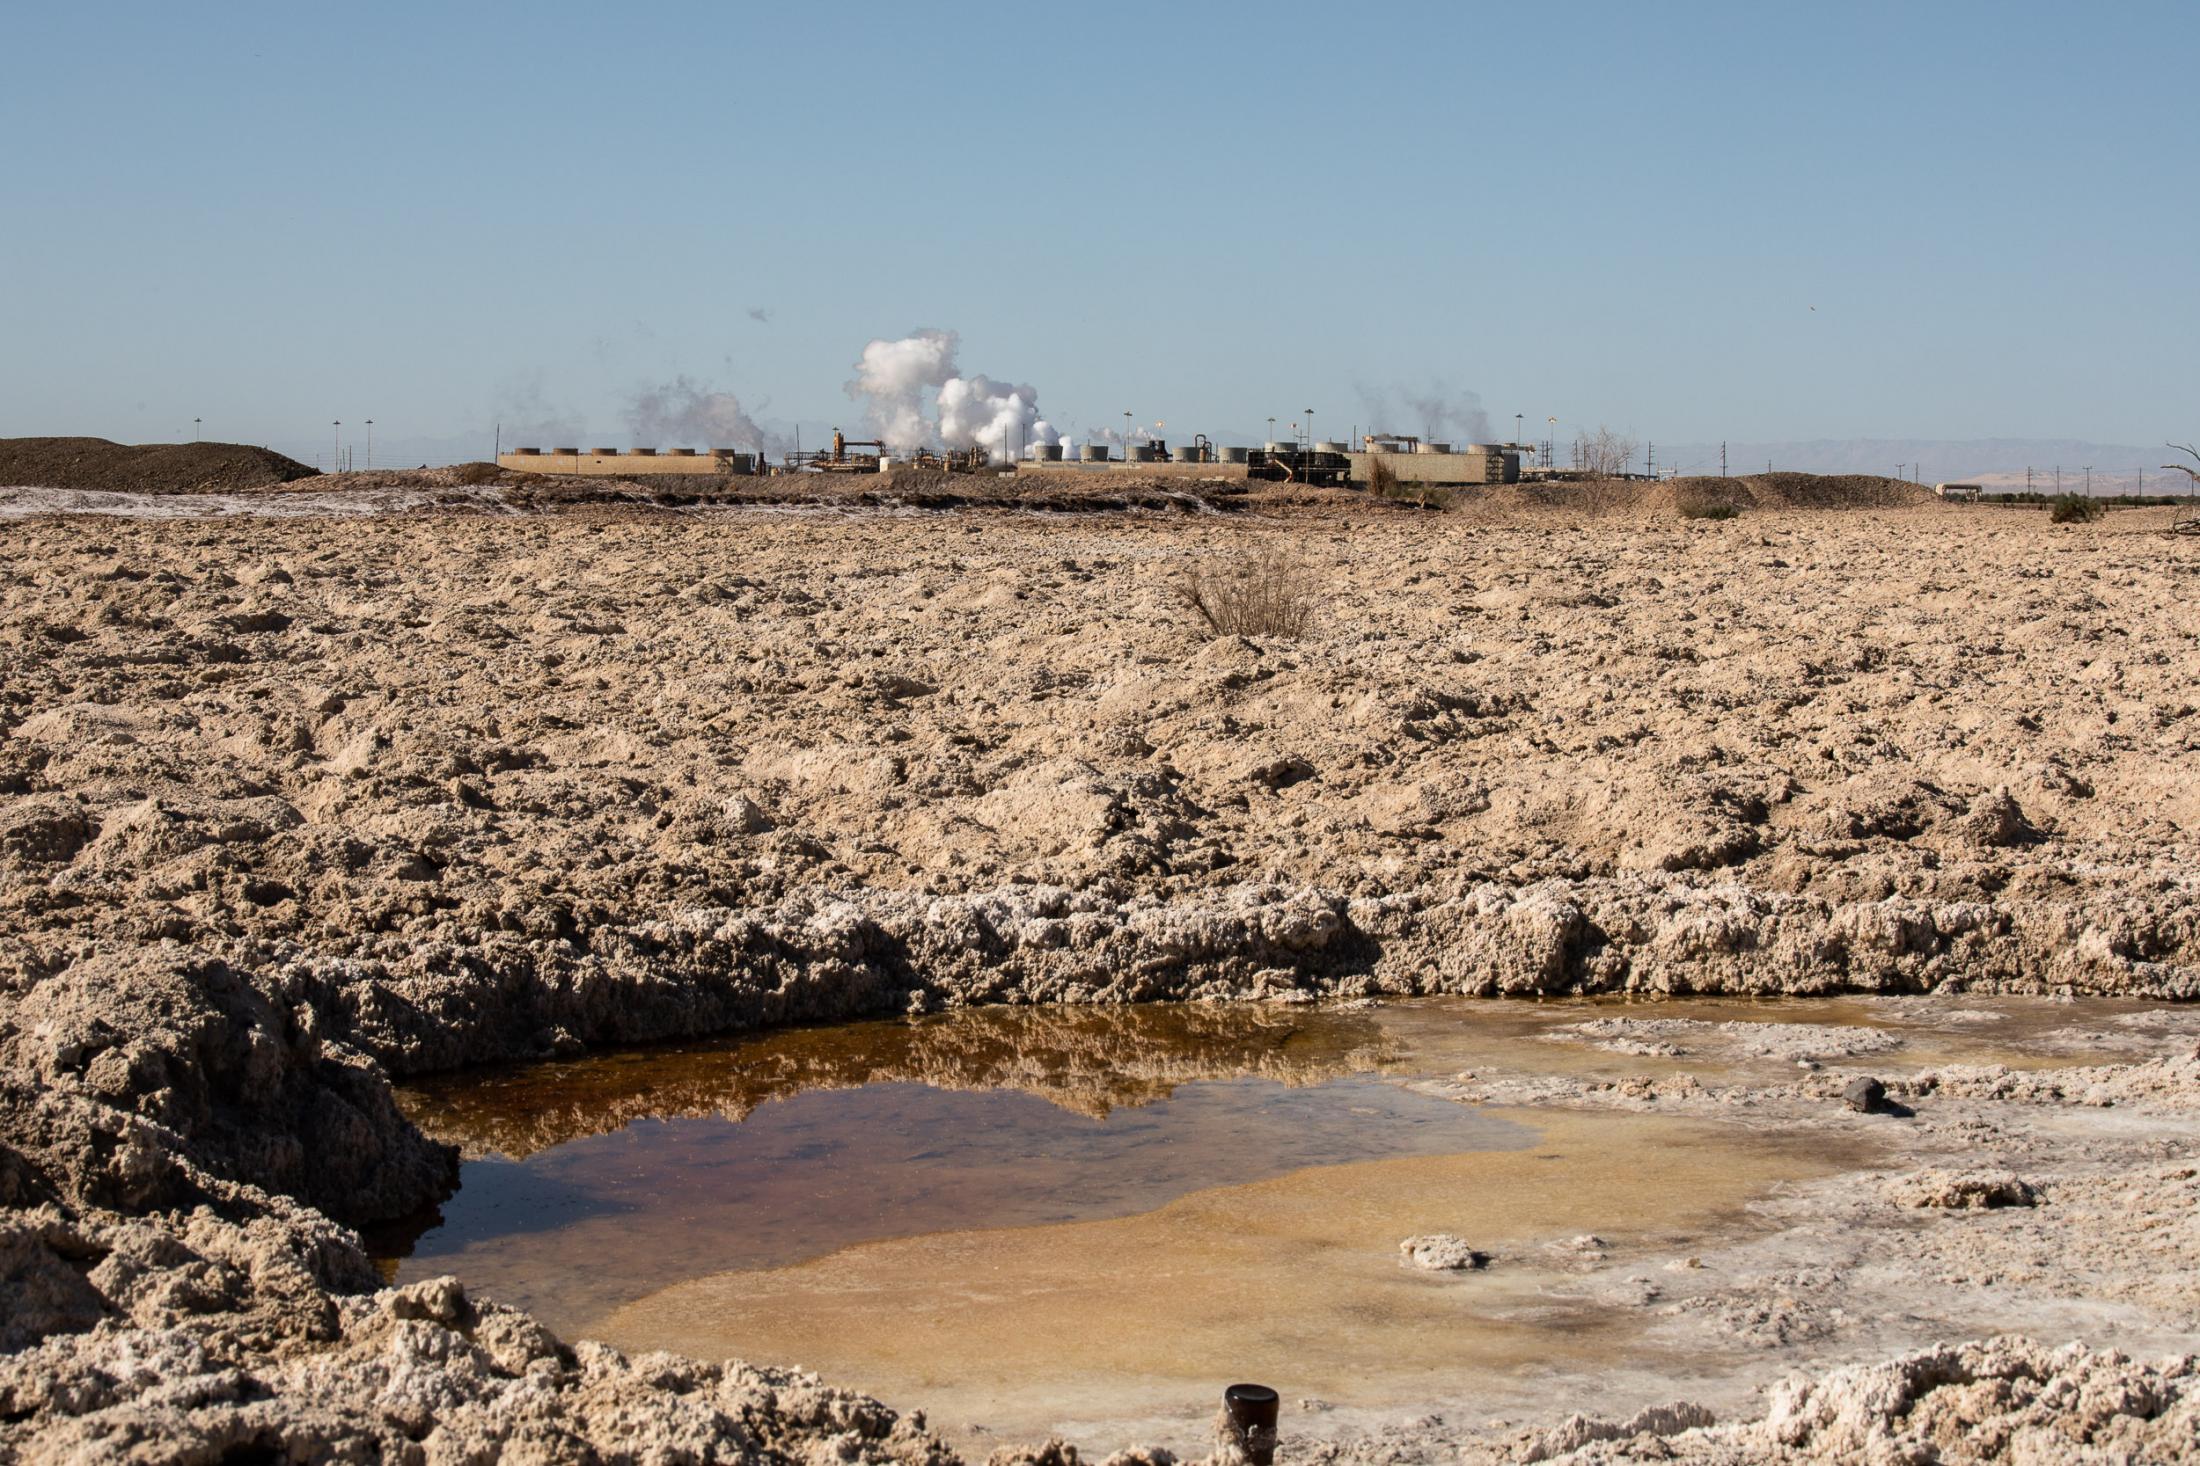  - The Salton Sea -  A geothermal plant at the south eastern shore of the...